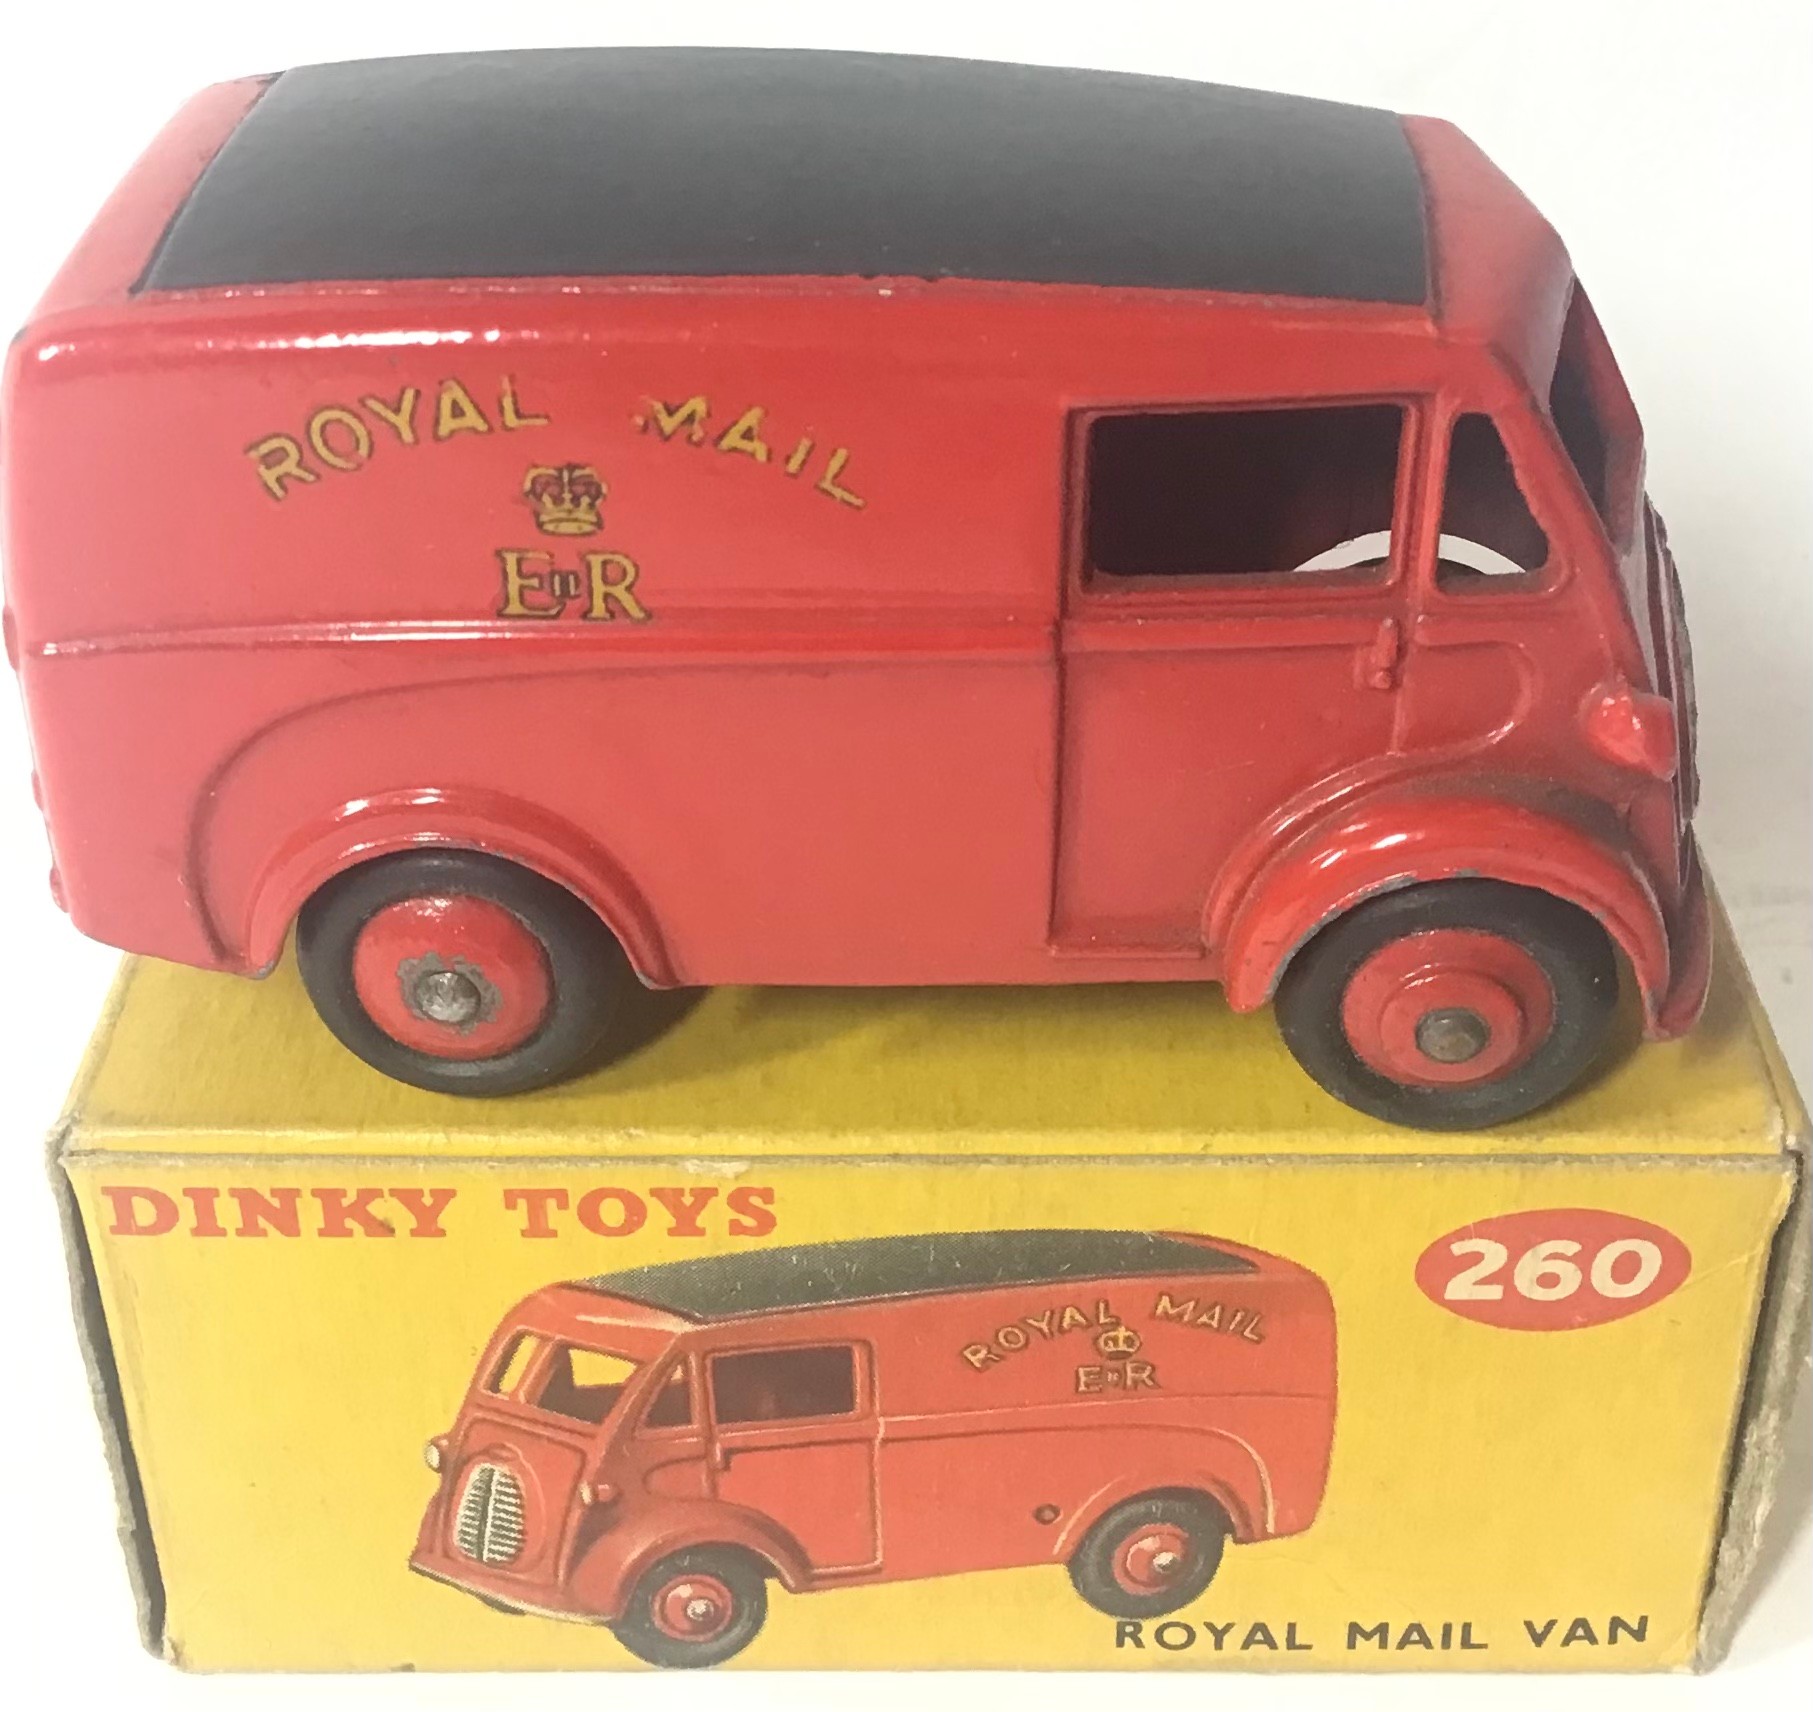 Dinky Toys 260 Royal Mail Van Boxed. Please see pics for condition.